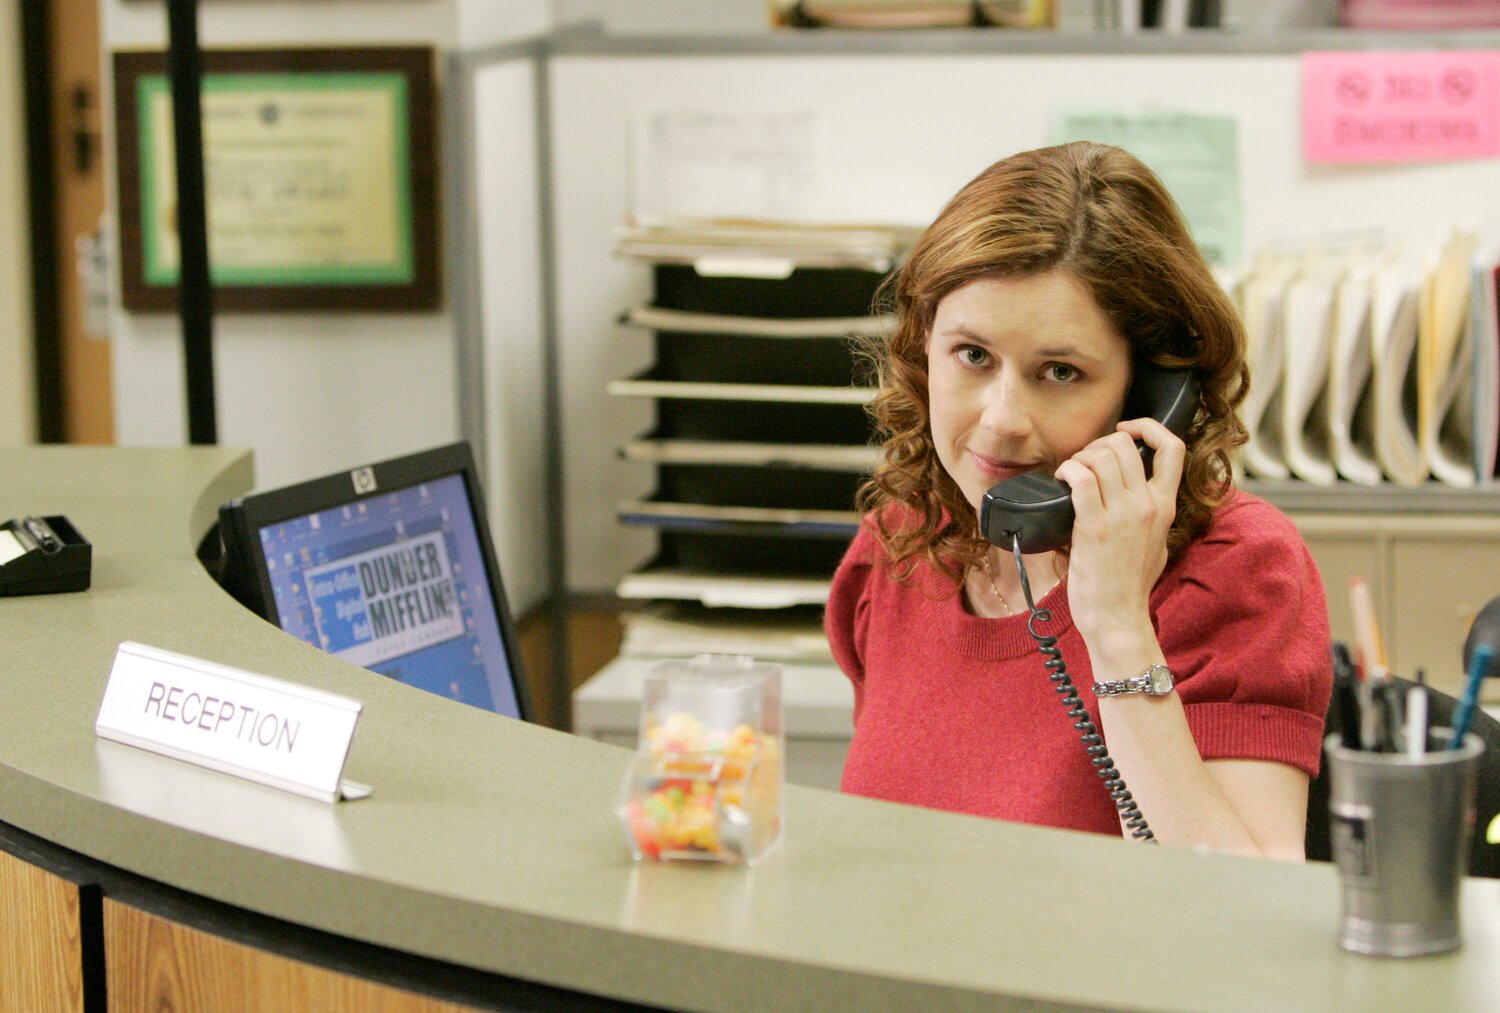 Jenna Fischer as Pam Beesly | Chris Haston/NBCU Photo Bank/NBCUniversal via Getty Images via Getty Images